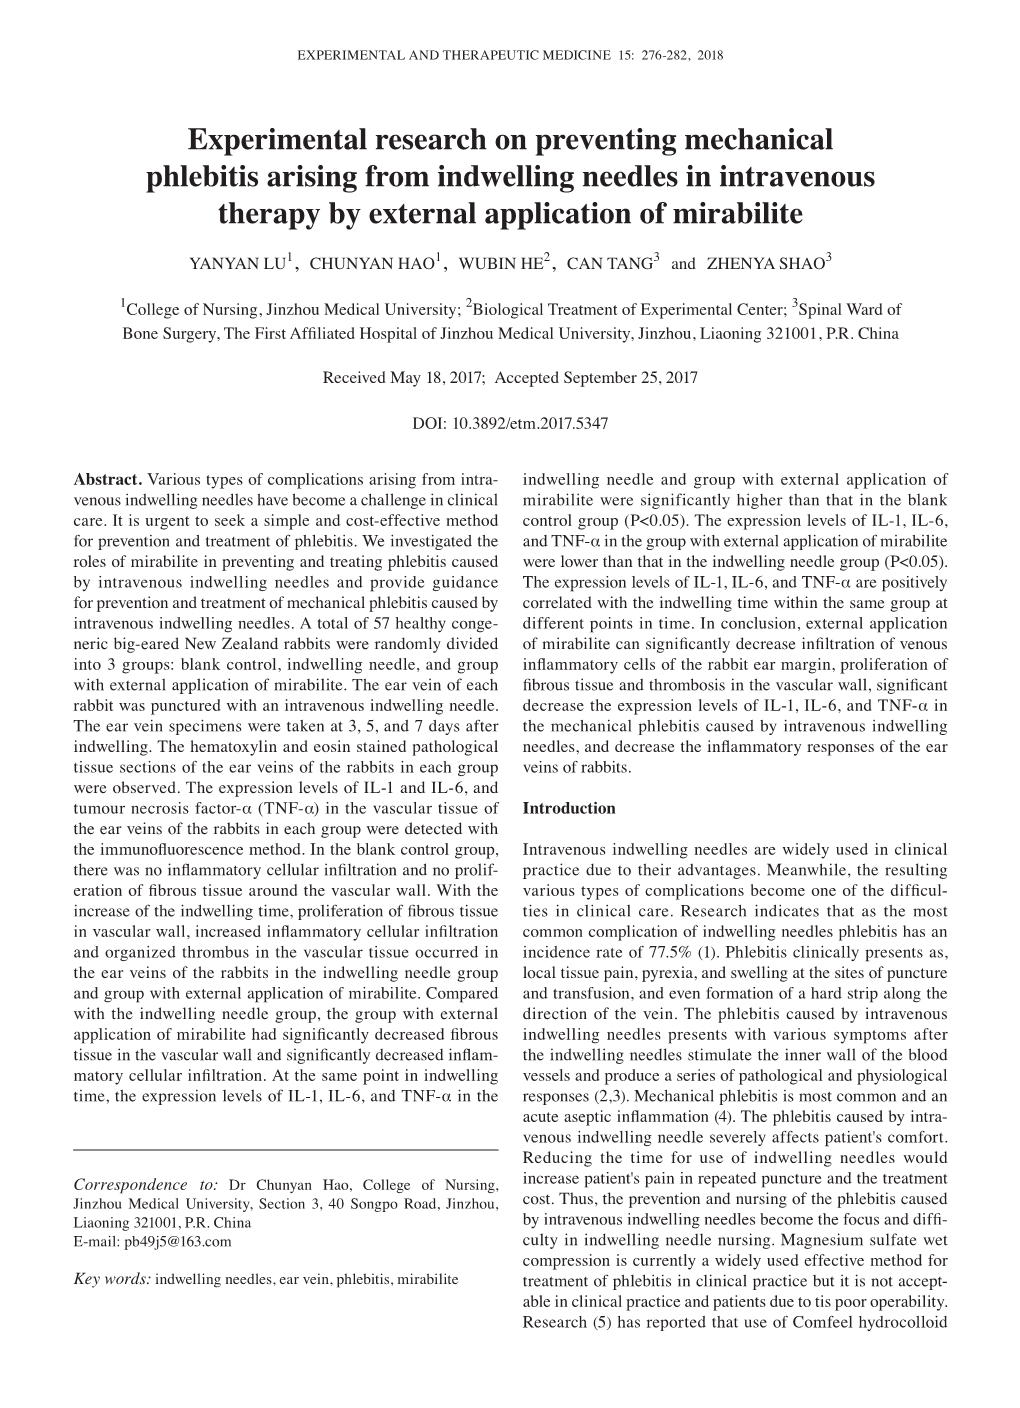 Experimental Research on Preventing Mechanical Phlebitis Arising from Indwelling Needles in Intravenous Therapy by External Application of Mirabilite